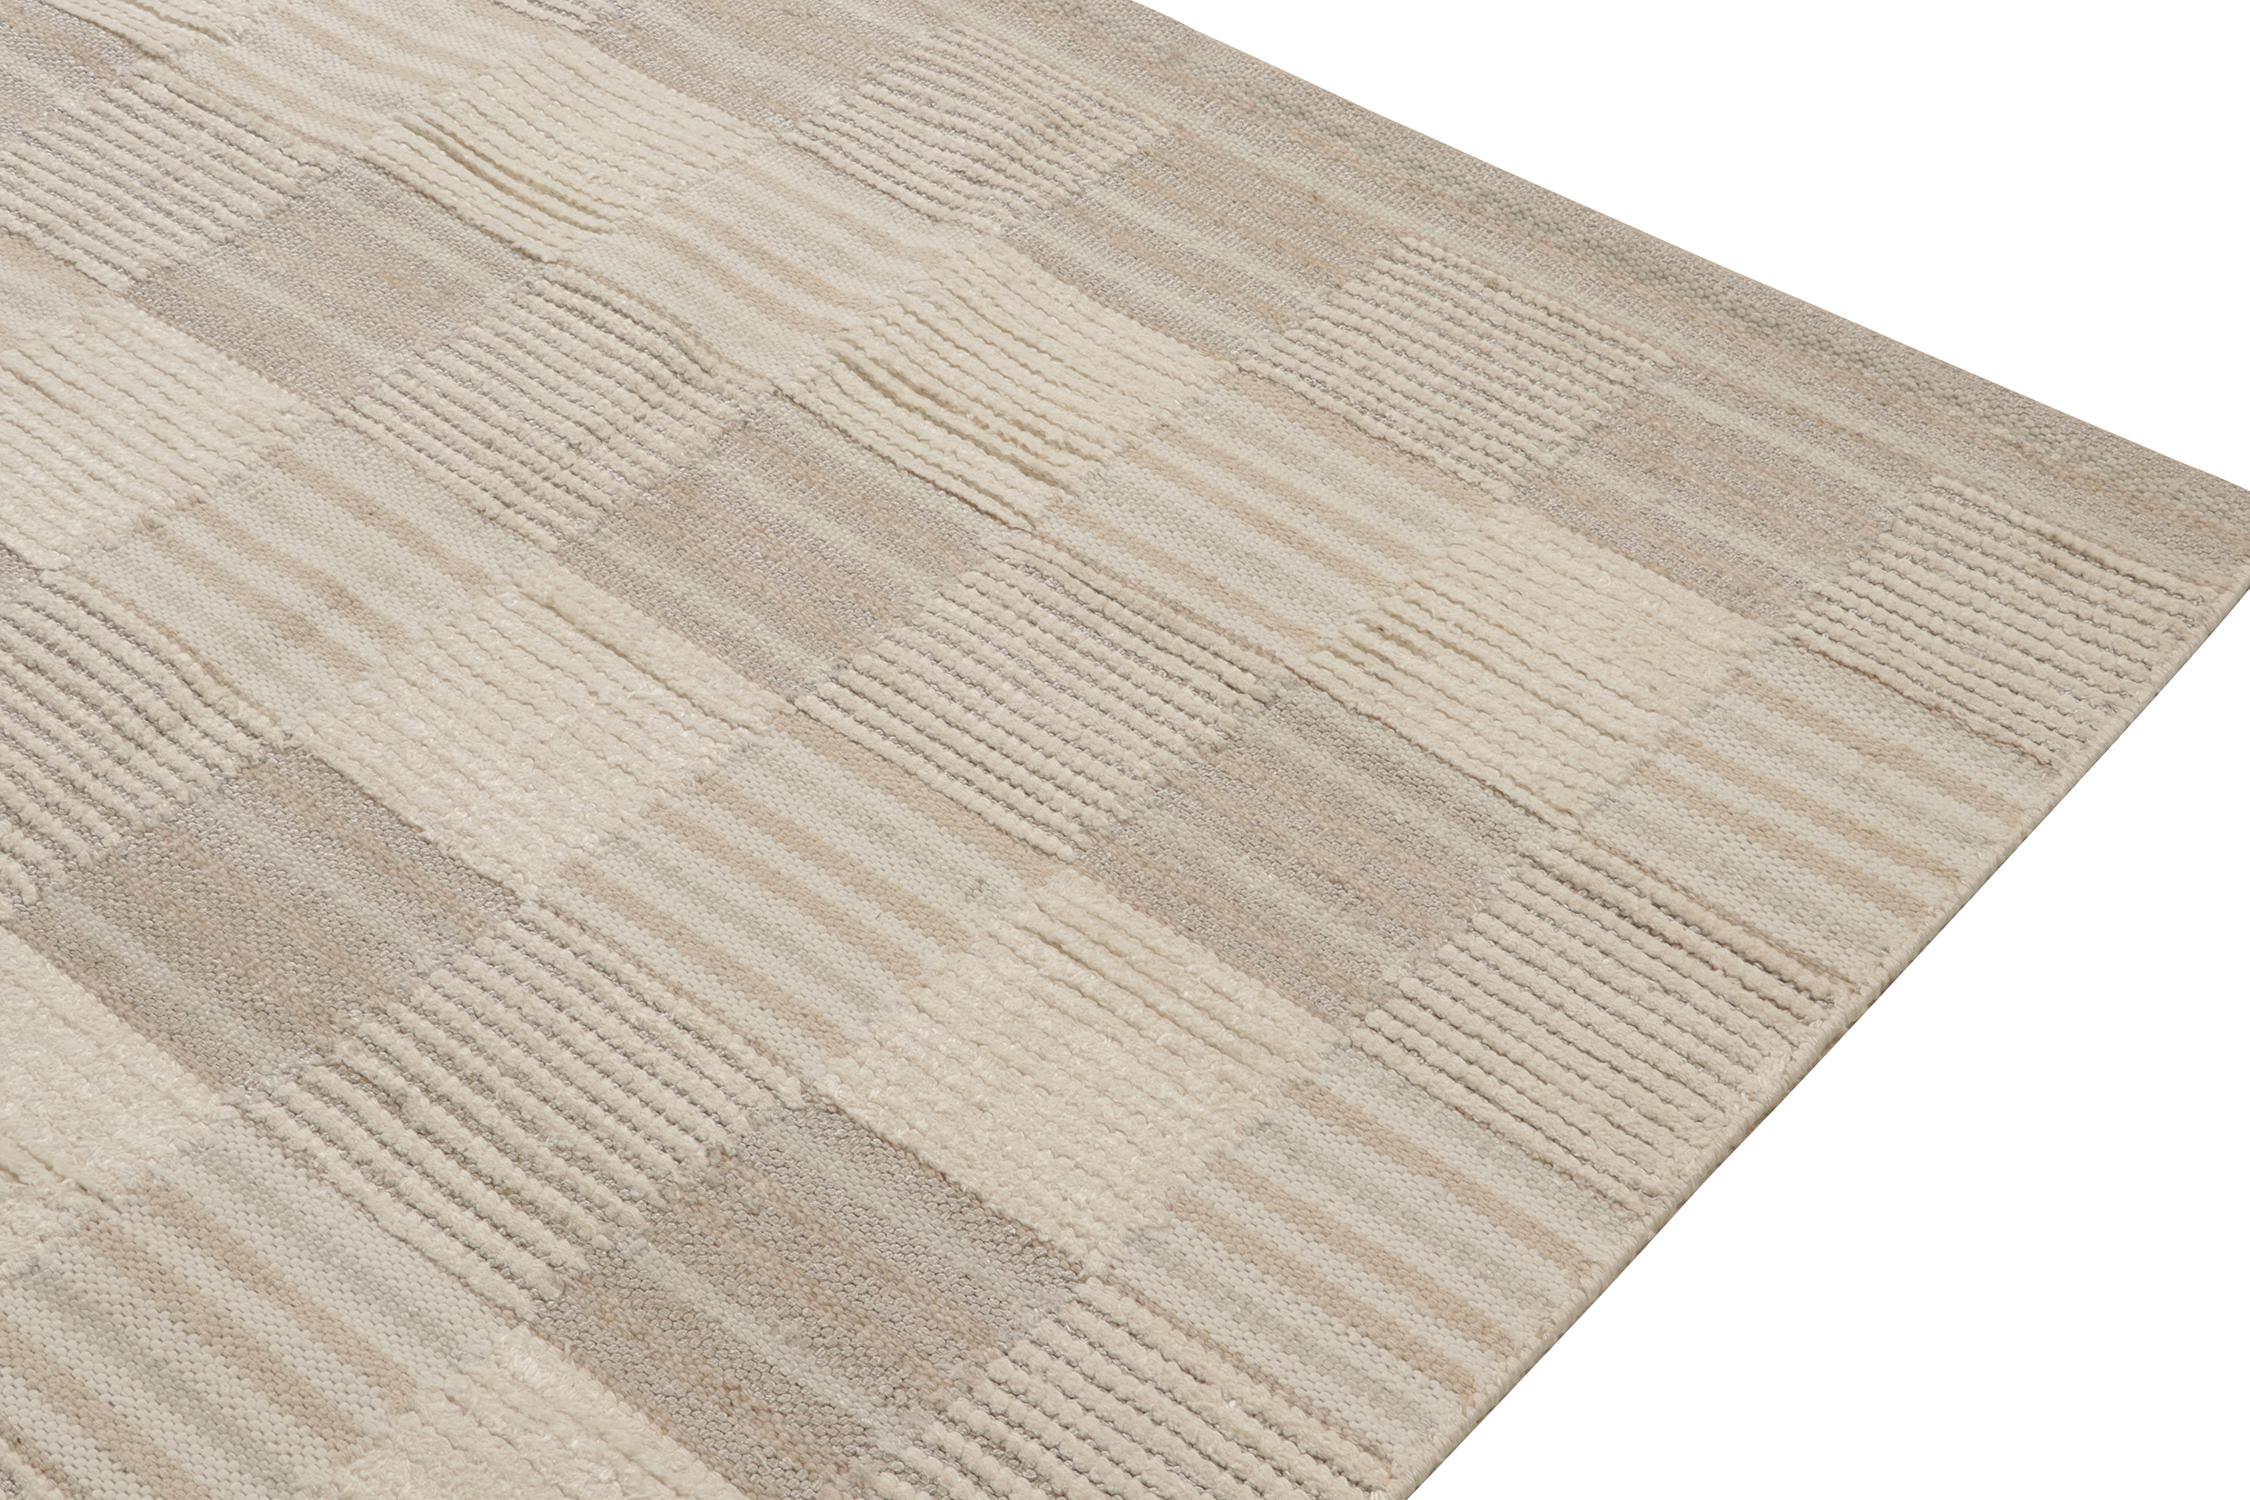 Rug & Kilim’s Scandinavian Style Kilim in Beige and White Geometric Pattern In New Condition For Sale In Long Island City, NY